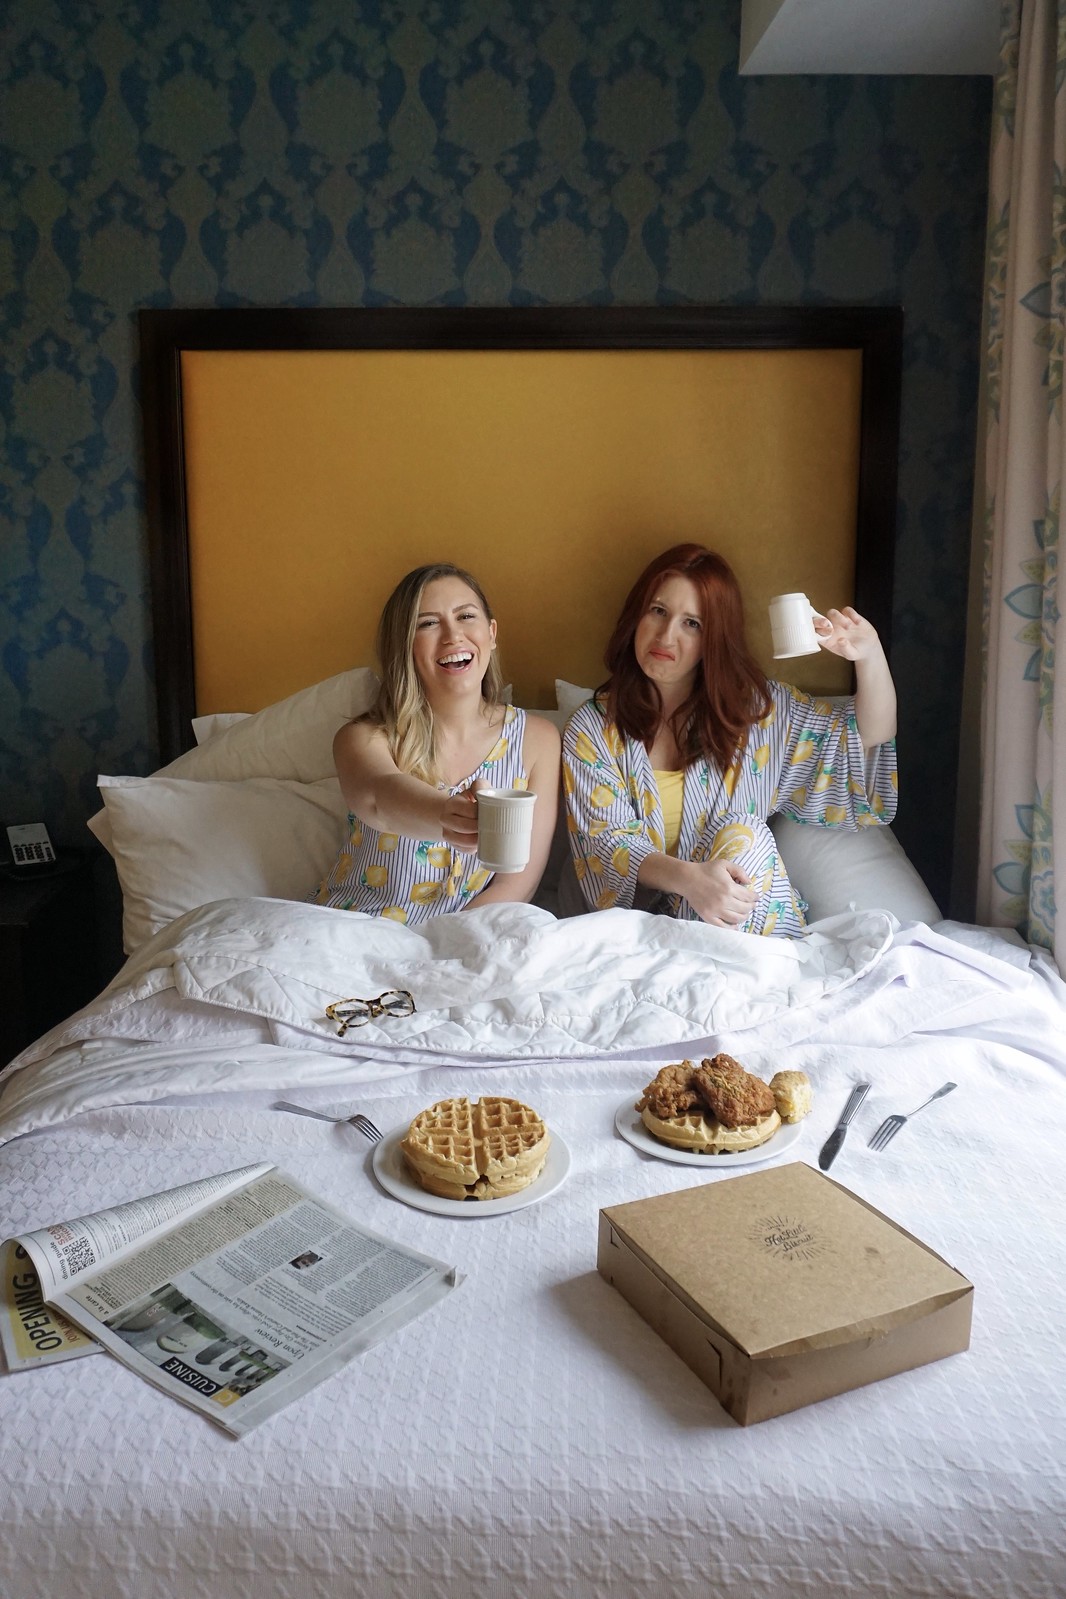 Soma Intimates Lemon Zest Pajamas | Girls Hotel Sleepover | Breakfast in Bed | 5 Reasons to Take a Girls Trip in your 30s | Traveling with Friends | Girls Only Sleepover | Girlfriend Getaways in the United States | Trip to take with your BFF